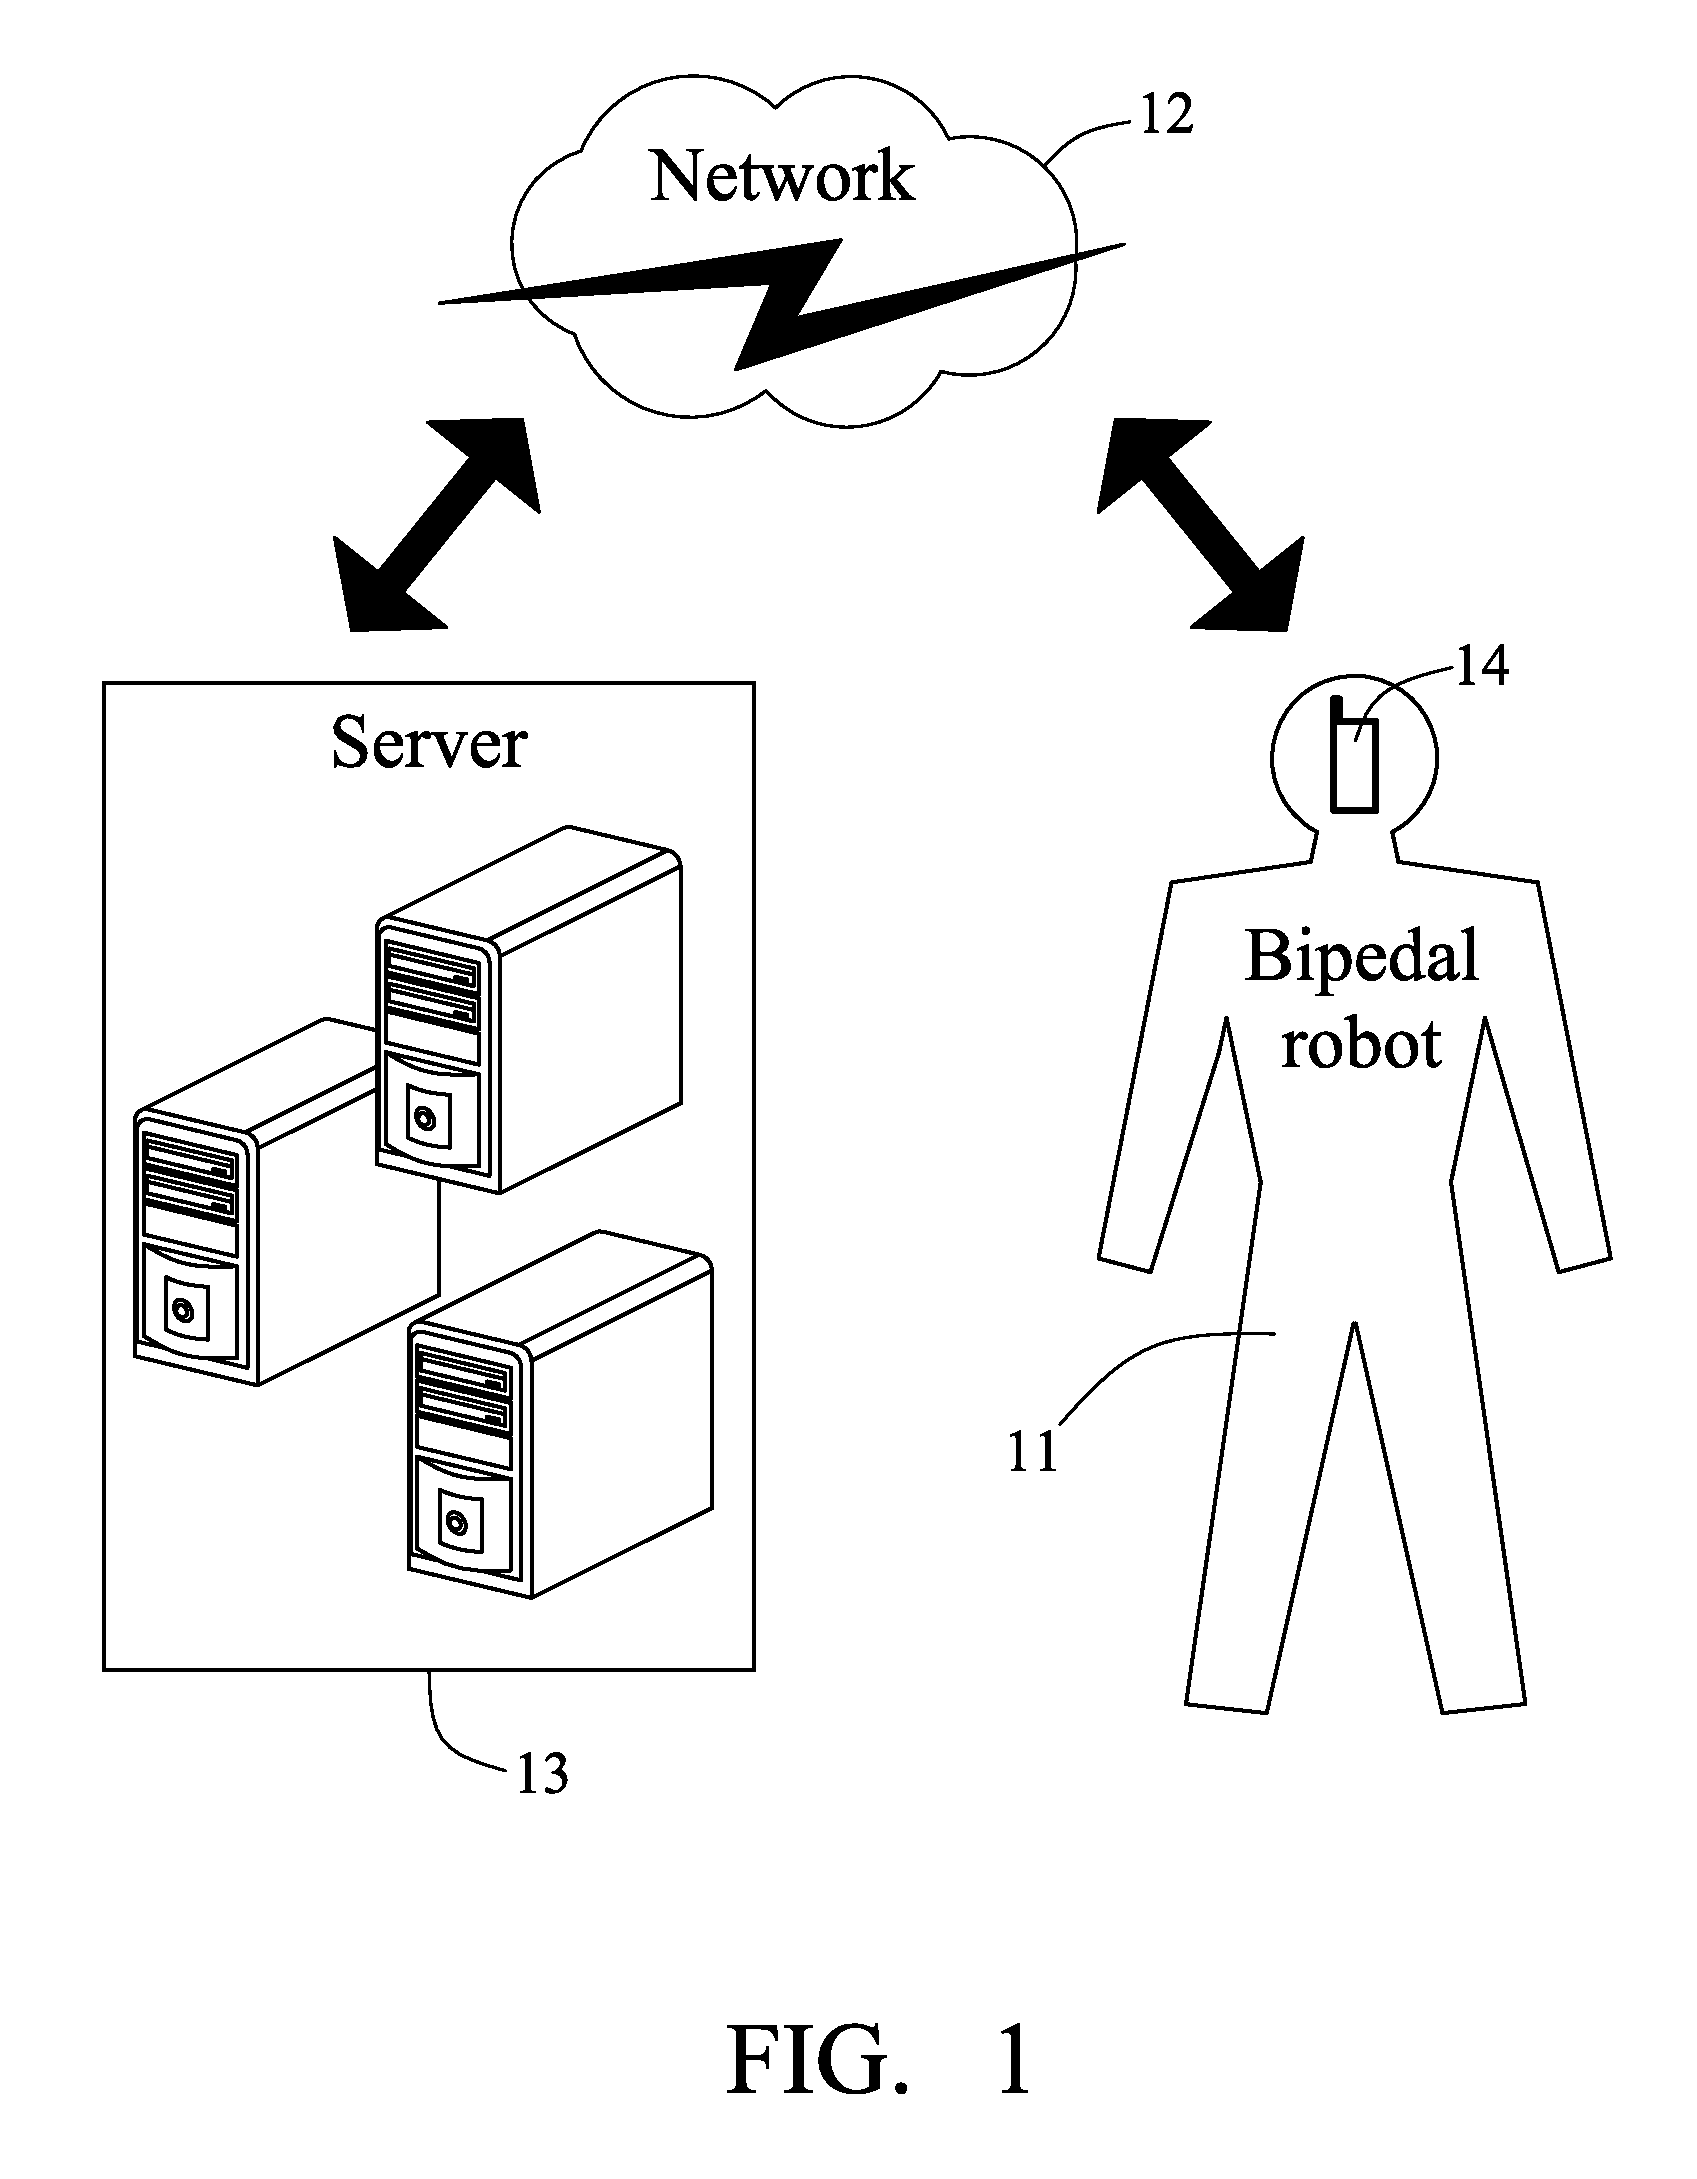 System and method for controlling a bipedal robot via a communication device